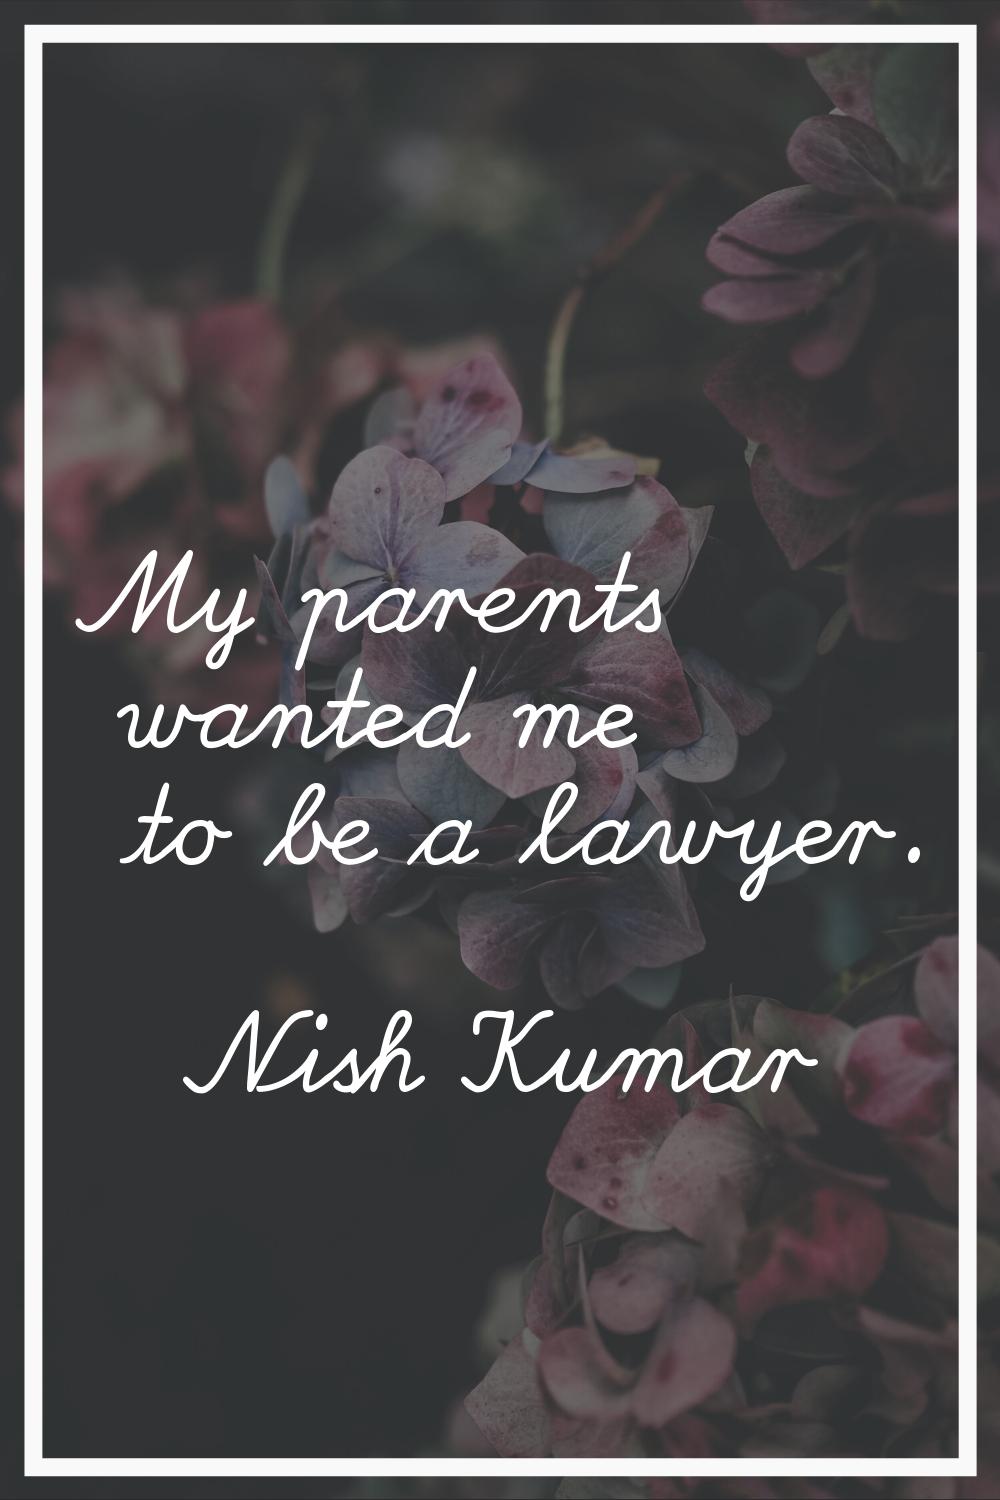 My parents wanted me to be a lawyer.